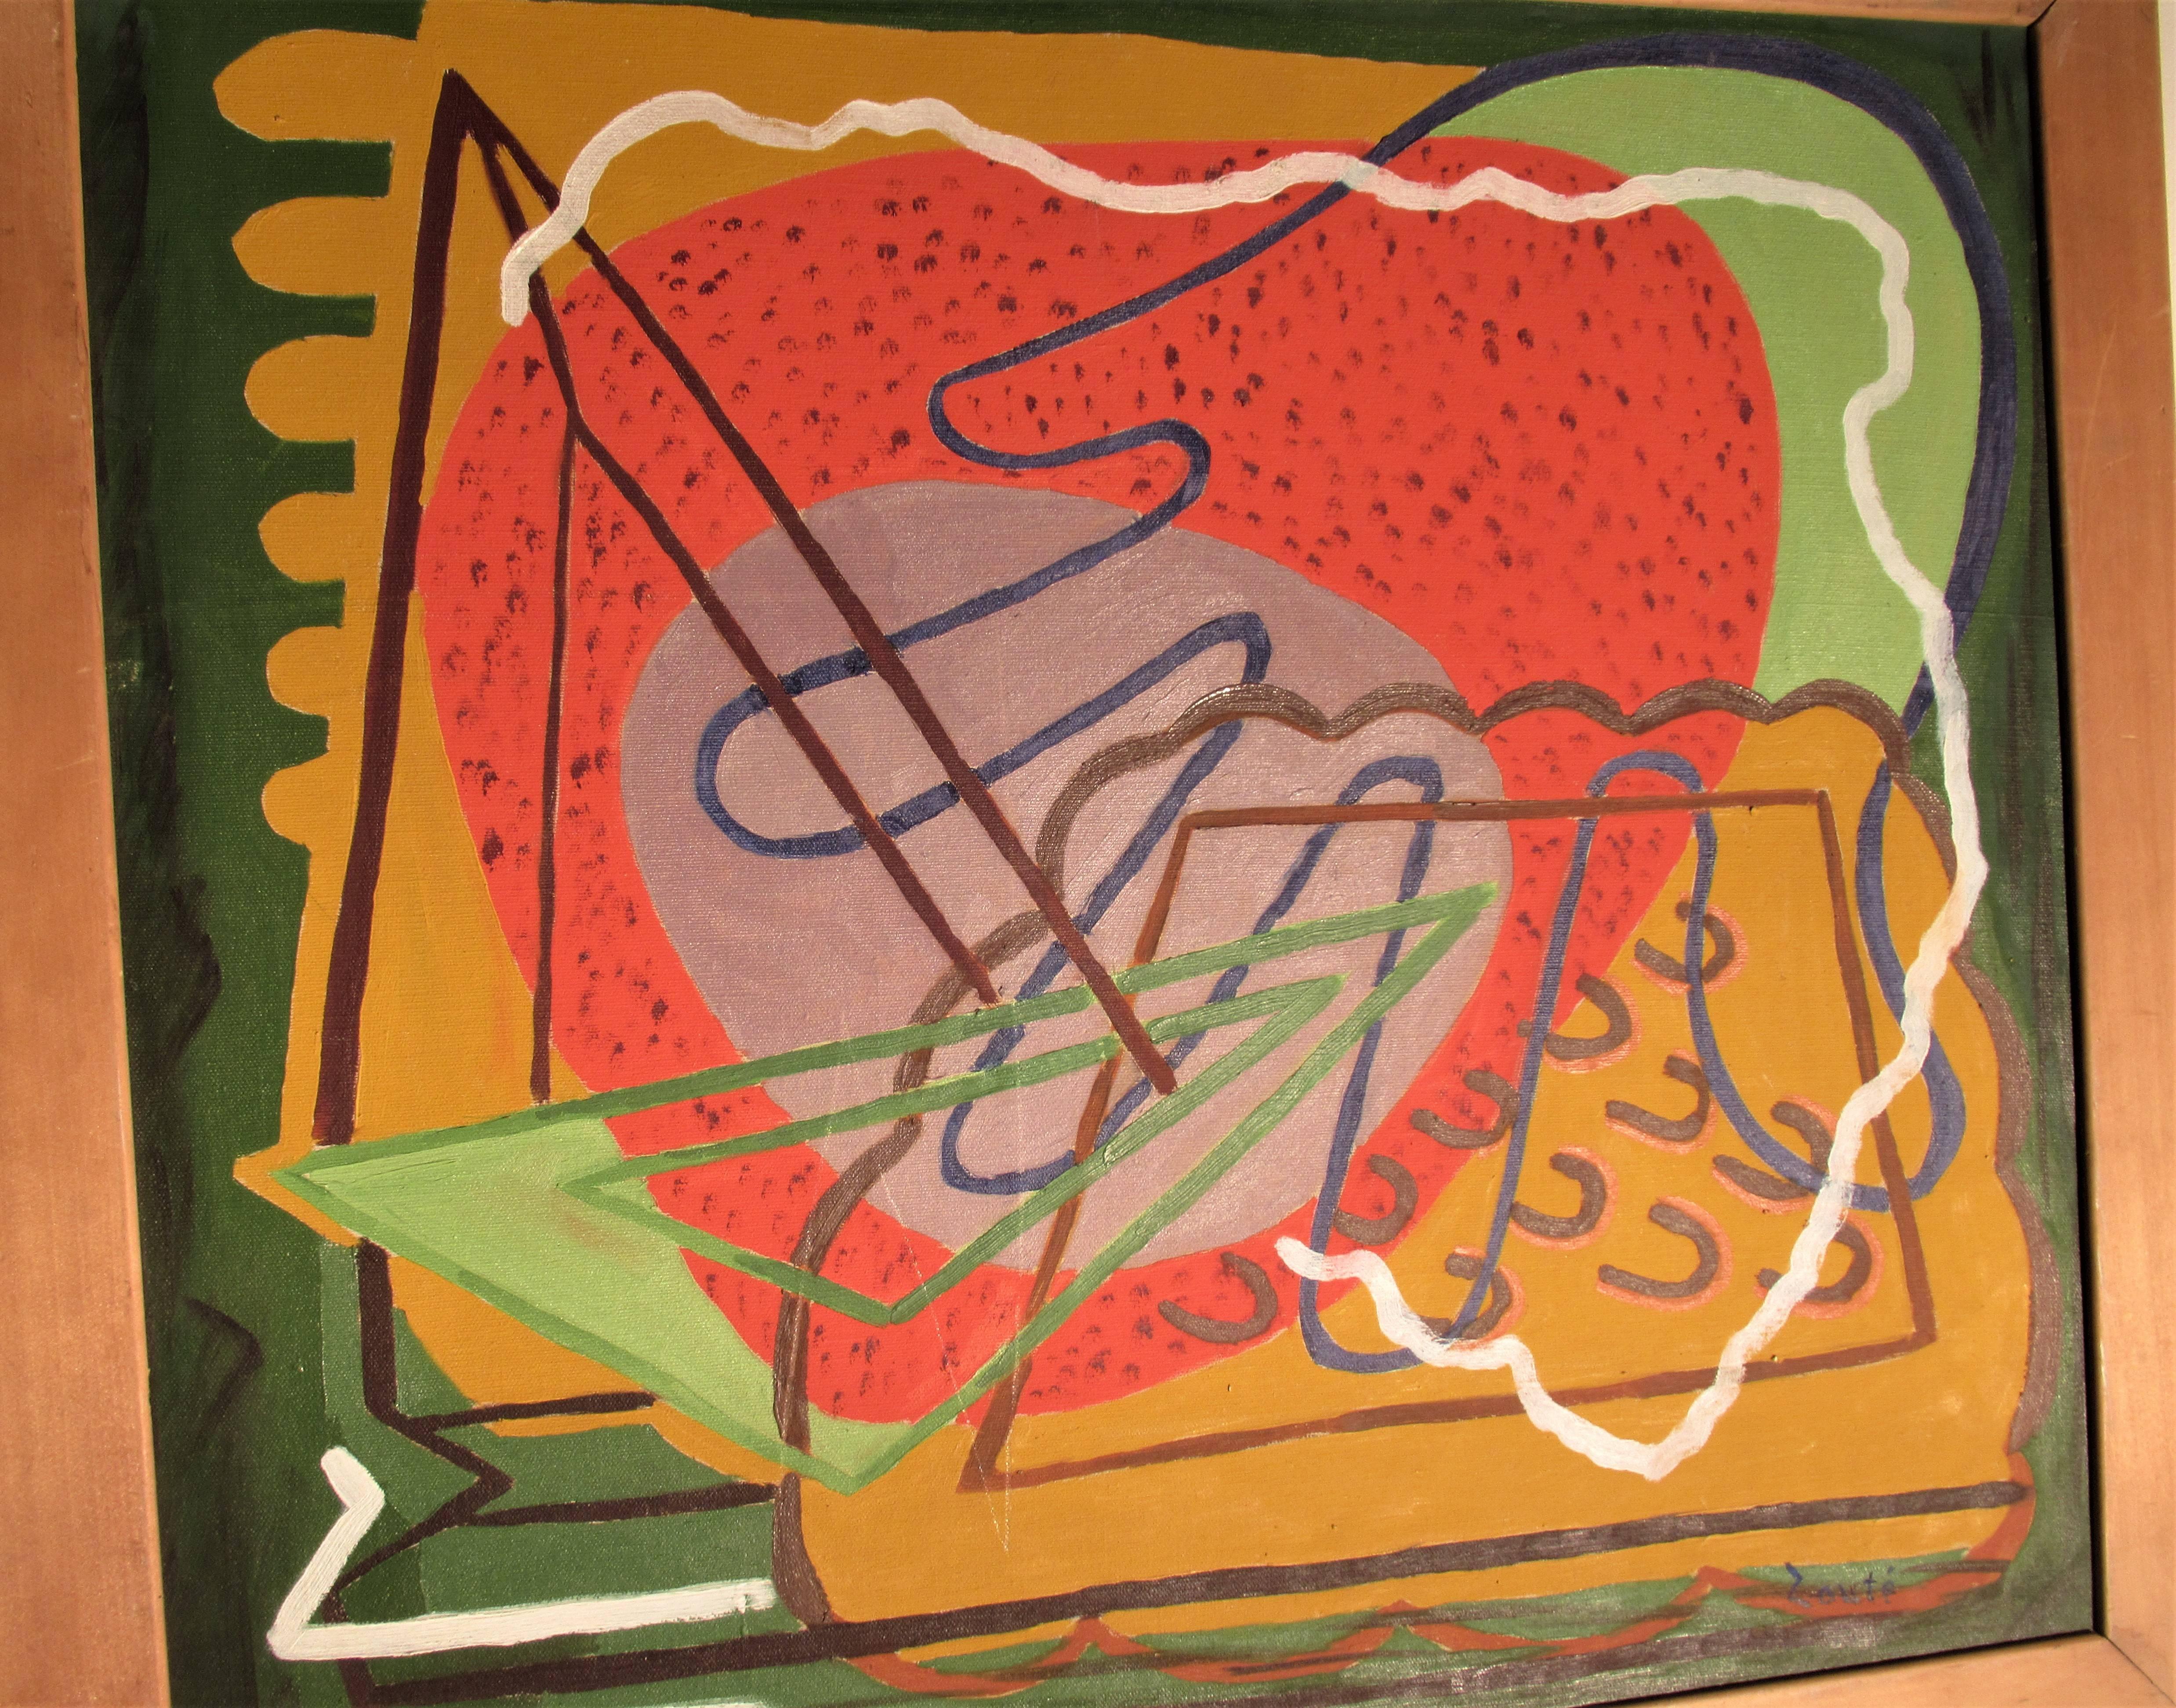 American modernist vibrant abstract oil painting on canvas tacked on plywood board by Leon Salter known as Zoute' (North Rose, NY - 1903- 1976) Zoute' is a rare undiscovered gem of an artist and part of the great wave of modern painting. He painted